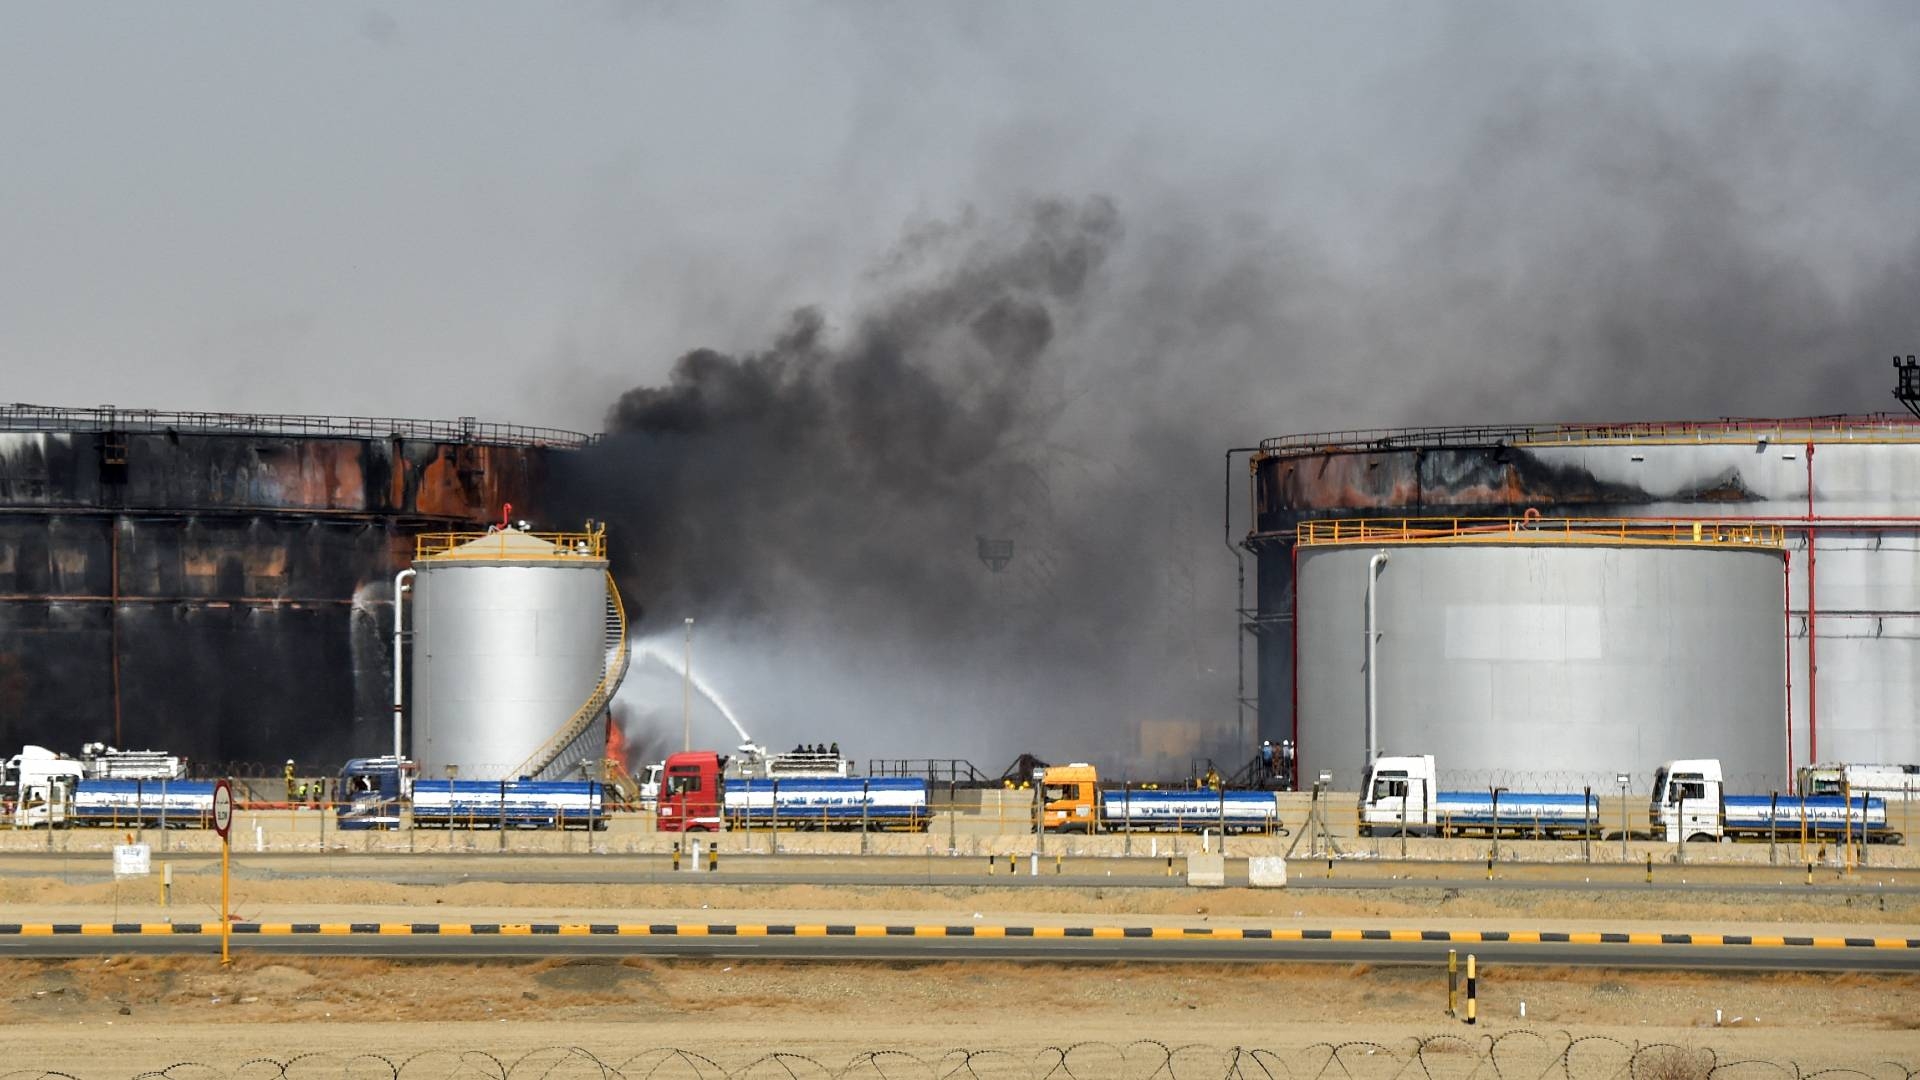 Fire fighters extinguish the last hearths of fire at a Saudi Aramco oil facility in Saudi Arabia's Red Sea coastal city of Jeddah, on 26 March 2022.